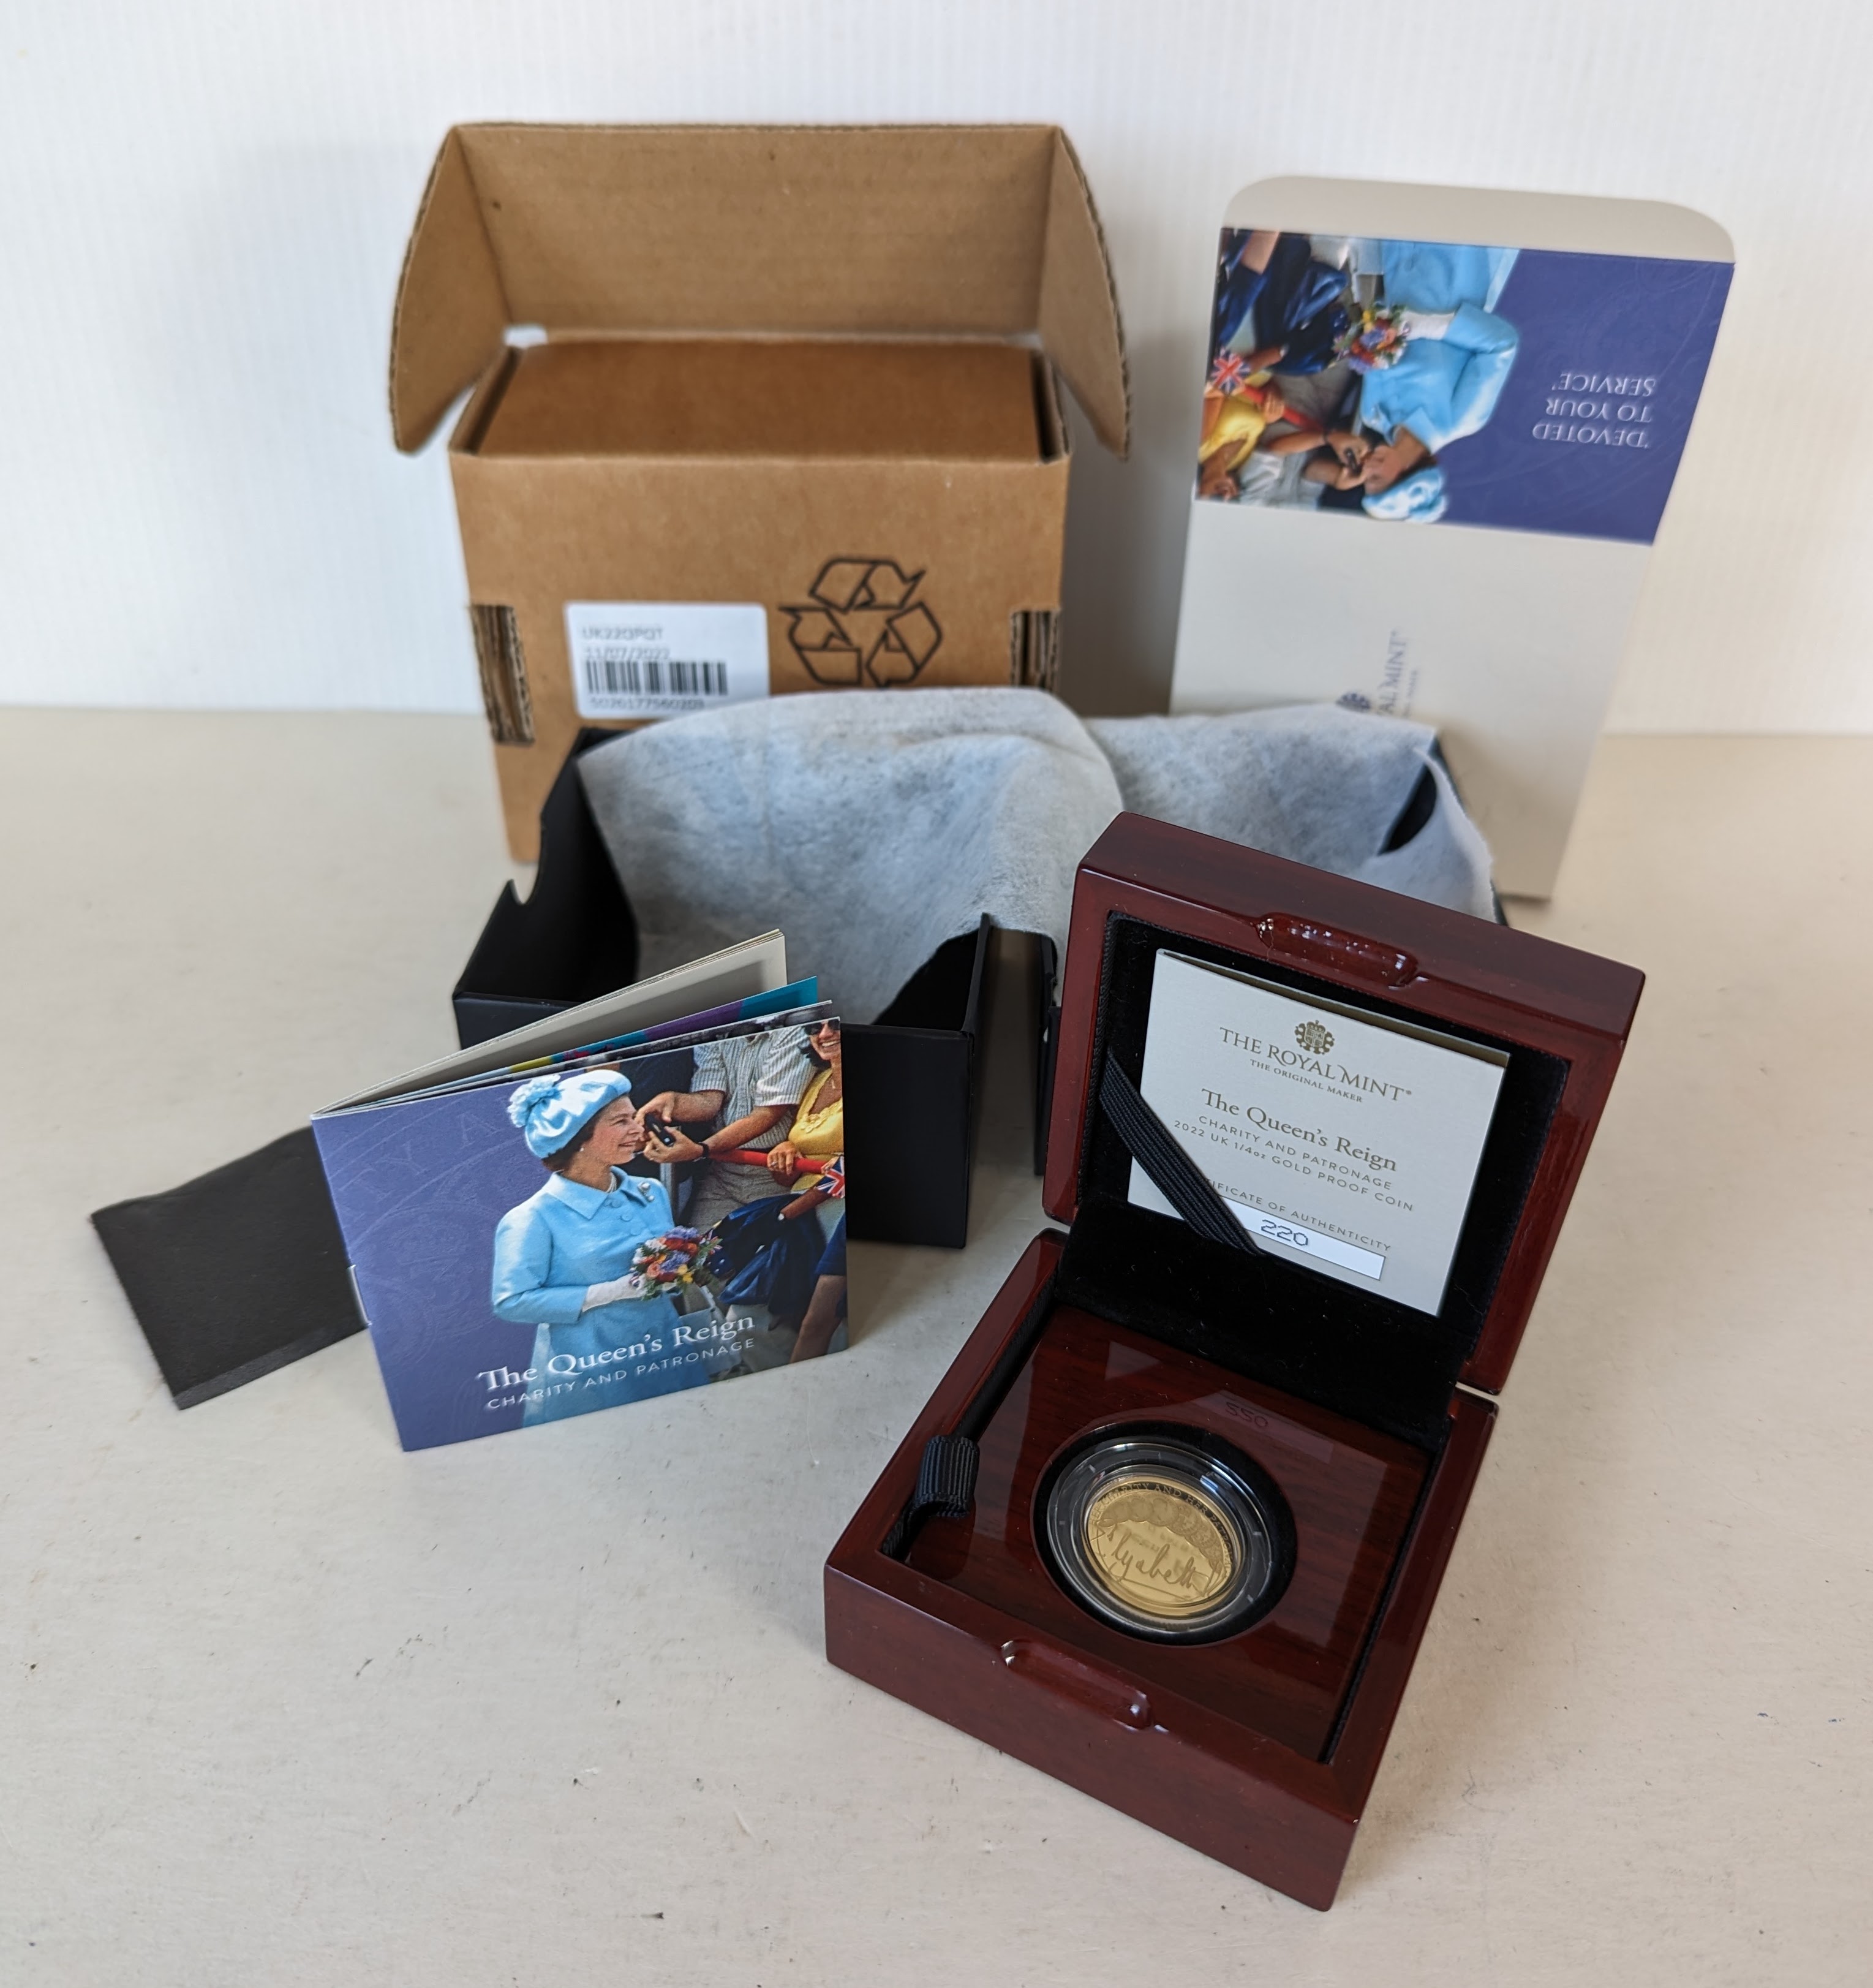 The Royal Mint The Queen's Reign, Charity and Patronage, 2022 UK 1/4 oz Gold Proof Coin, with COA  - Image 2 of 2